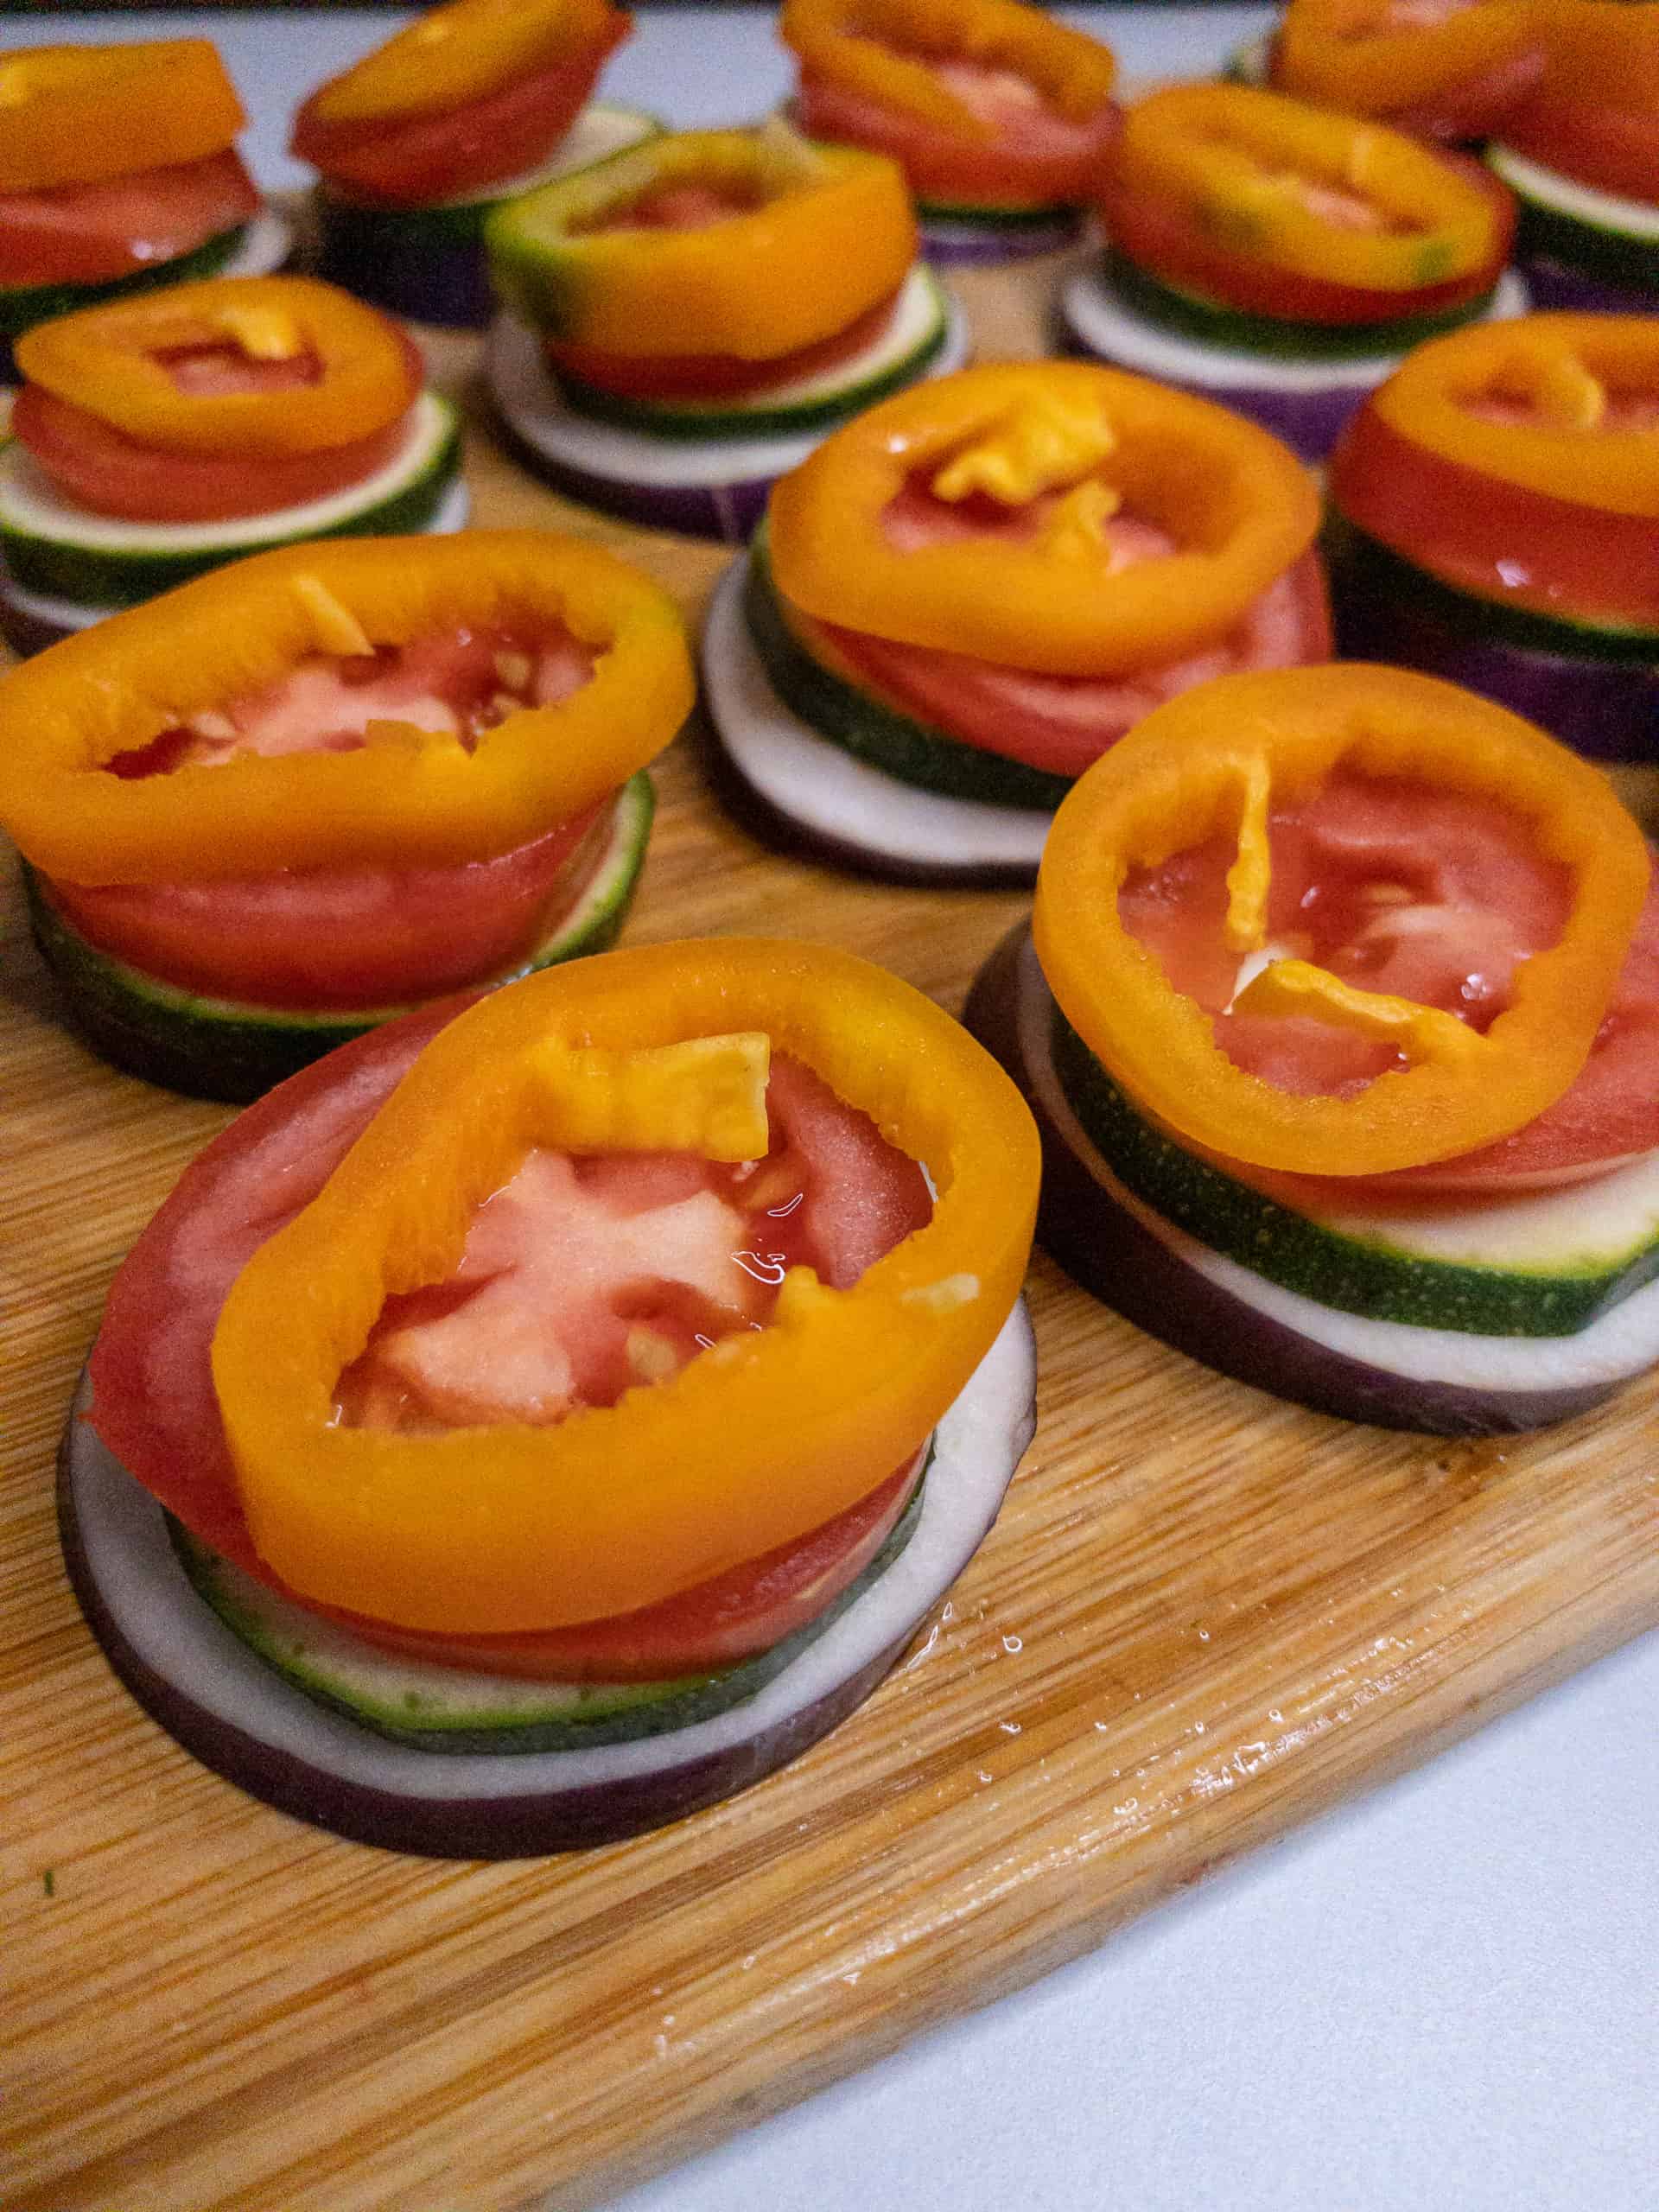 Stacks of vegetable slices ready for final assembly